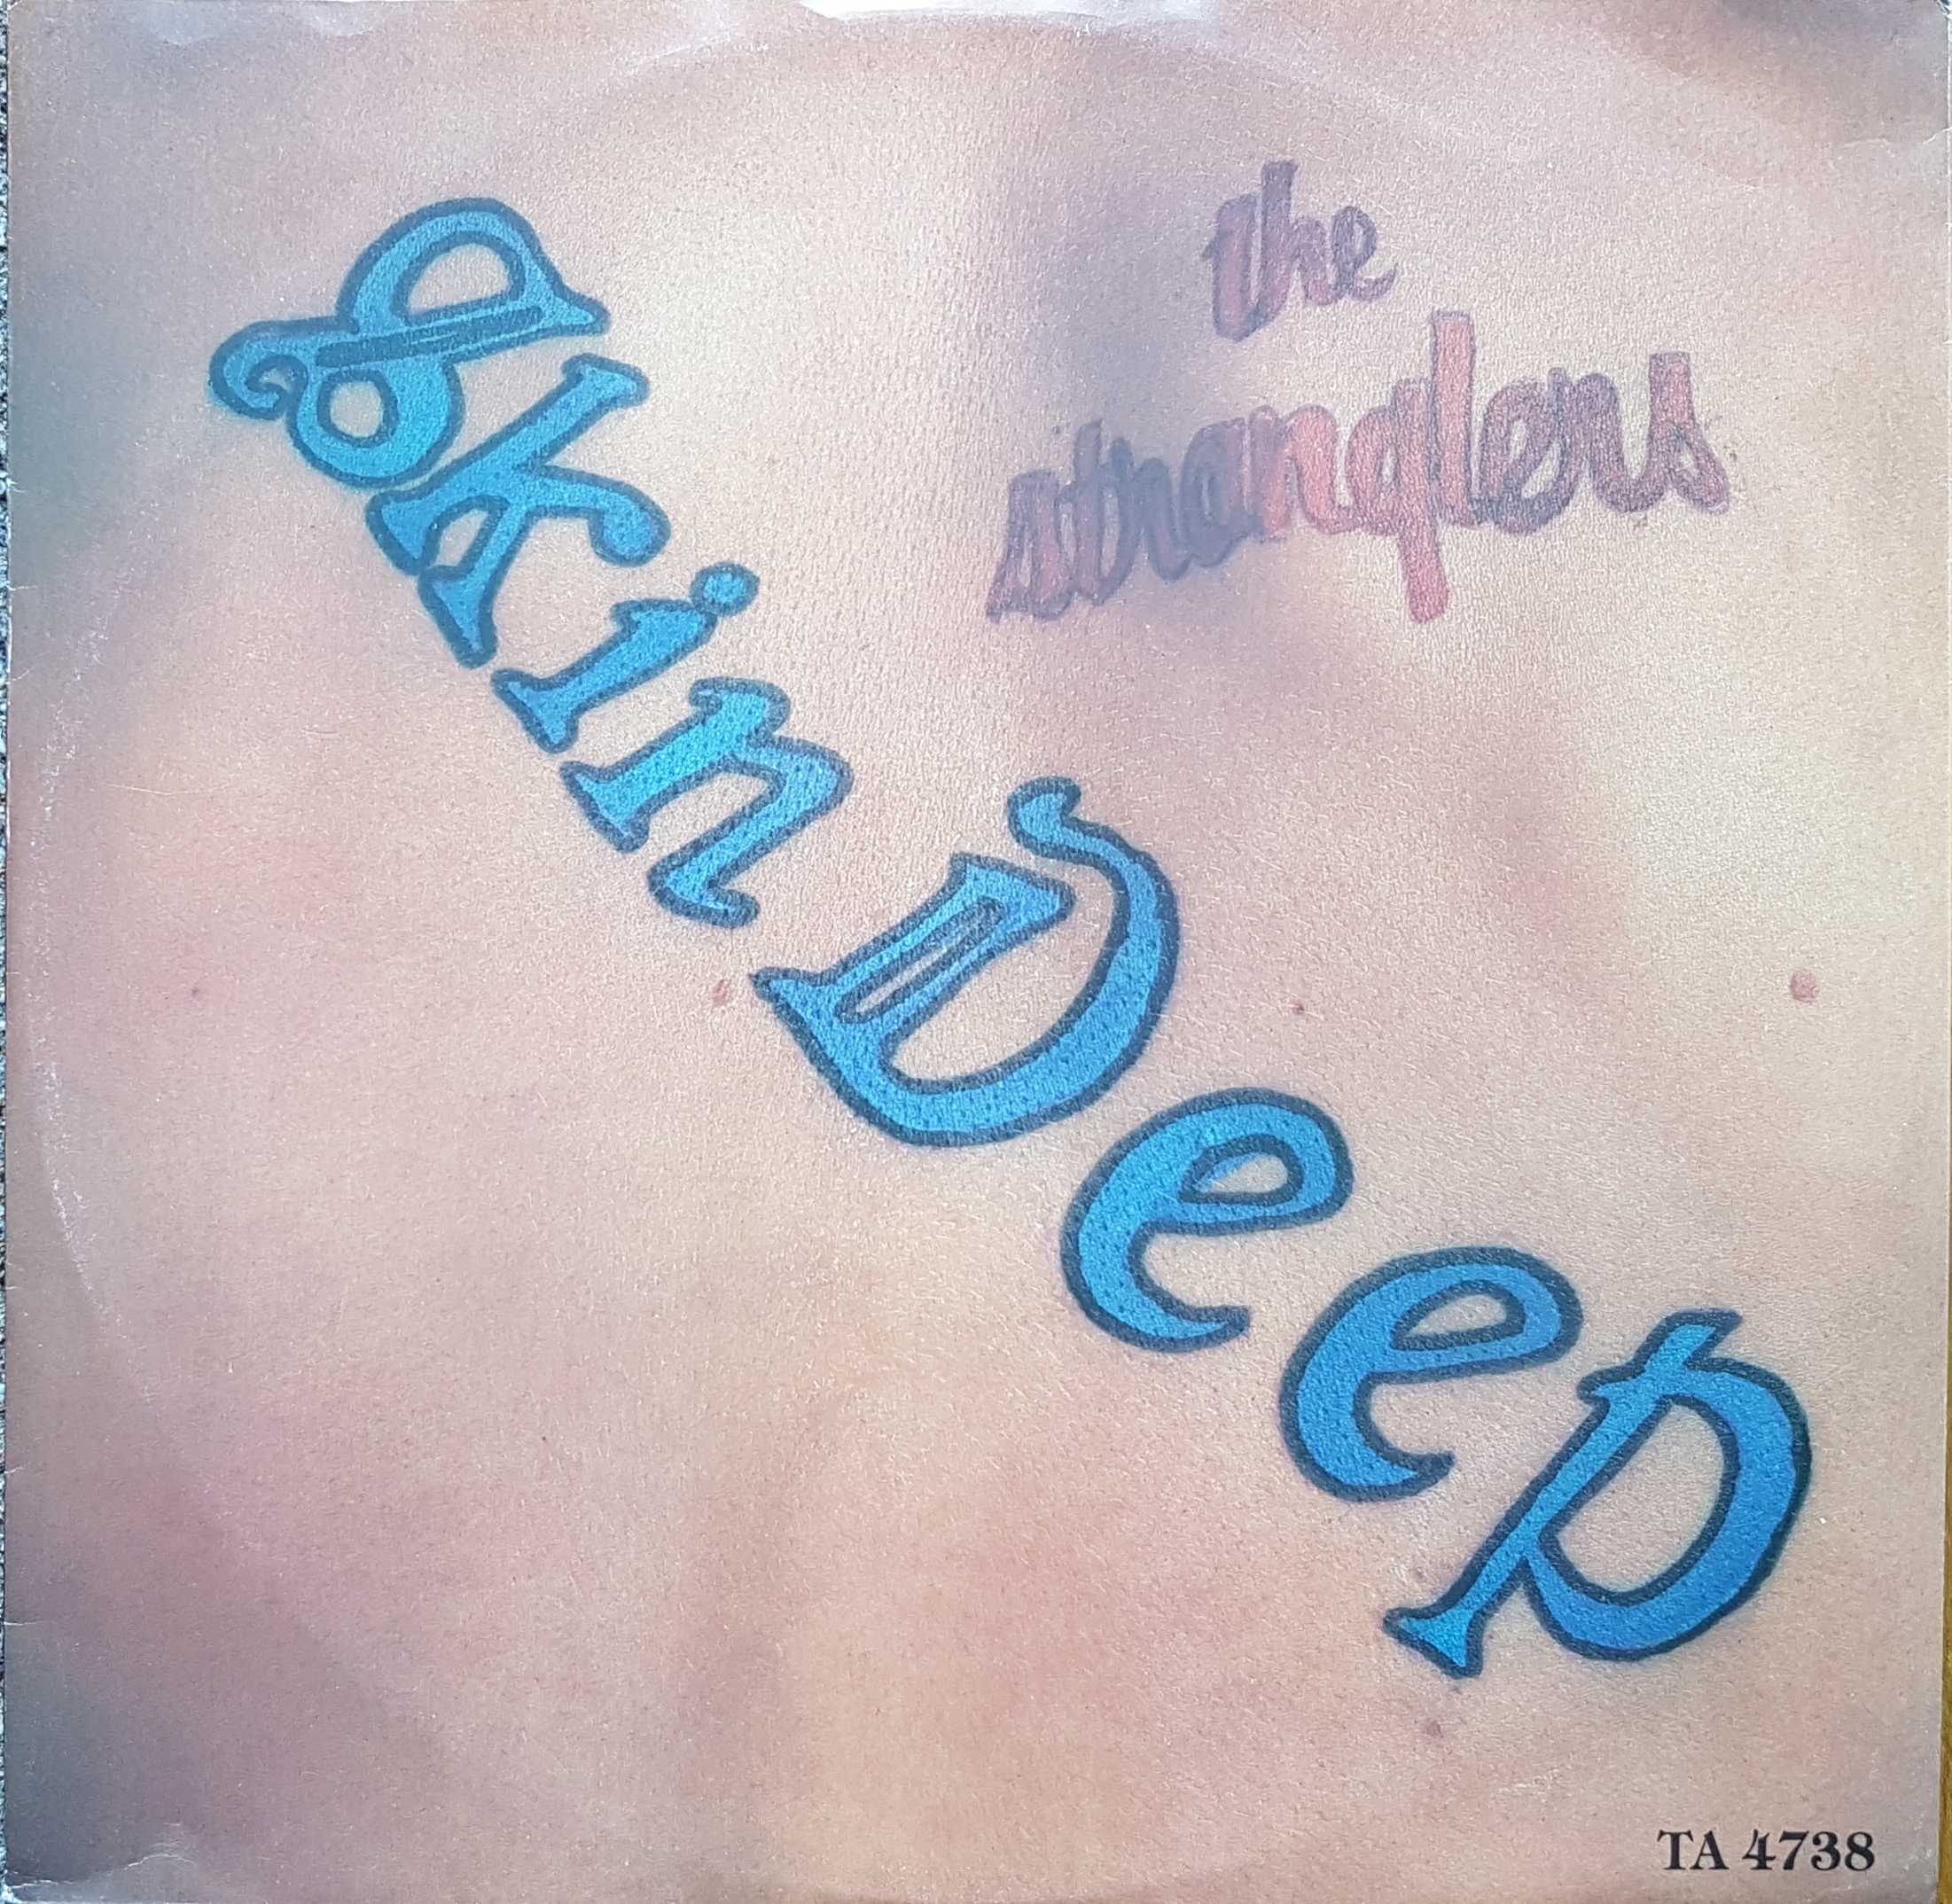 Picture of TA 4738 Skin deep by artist The Stranglers from The Stranglers 12inches